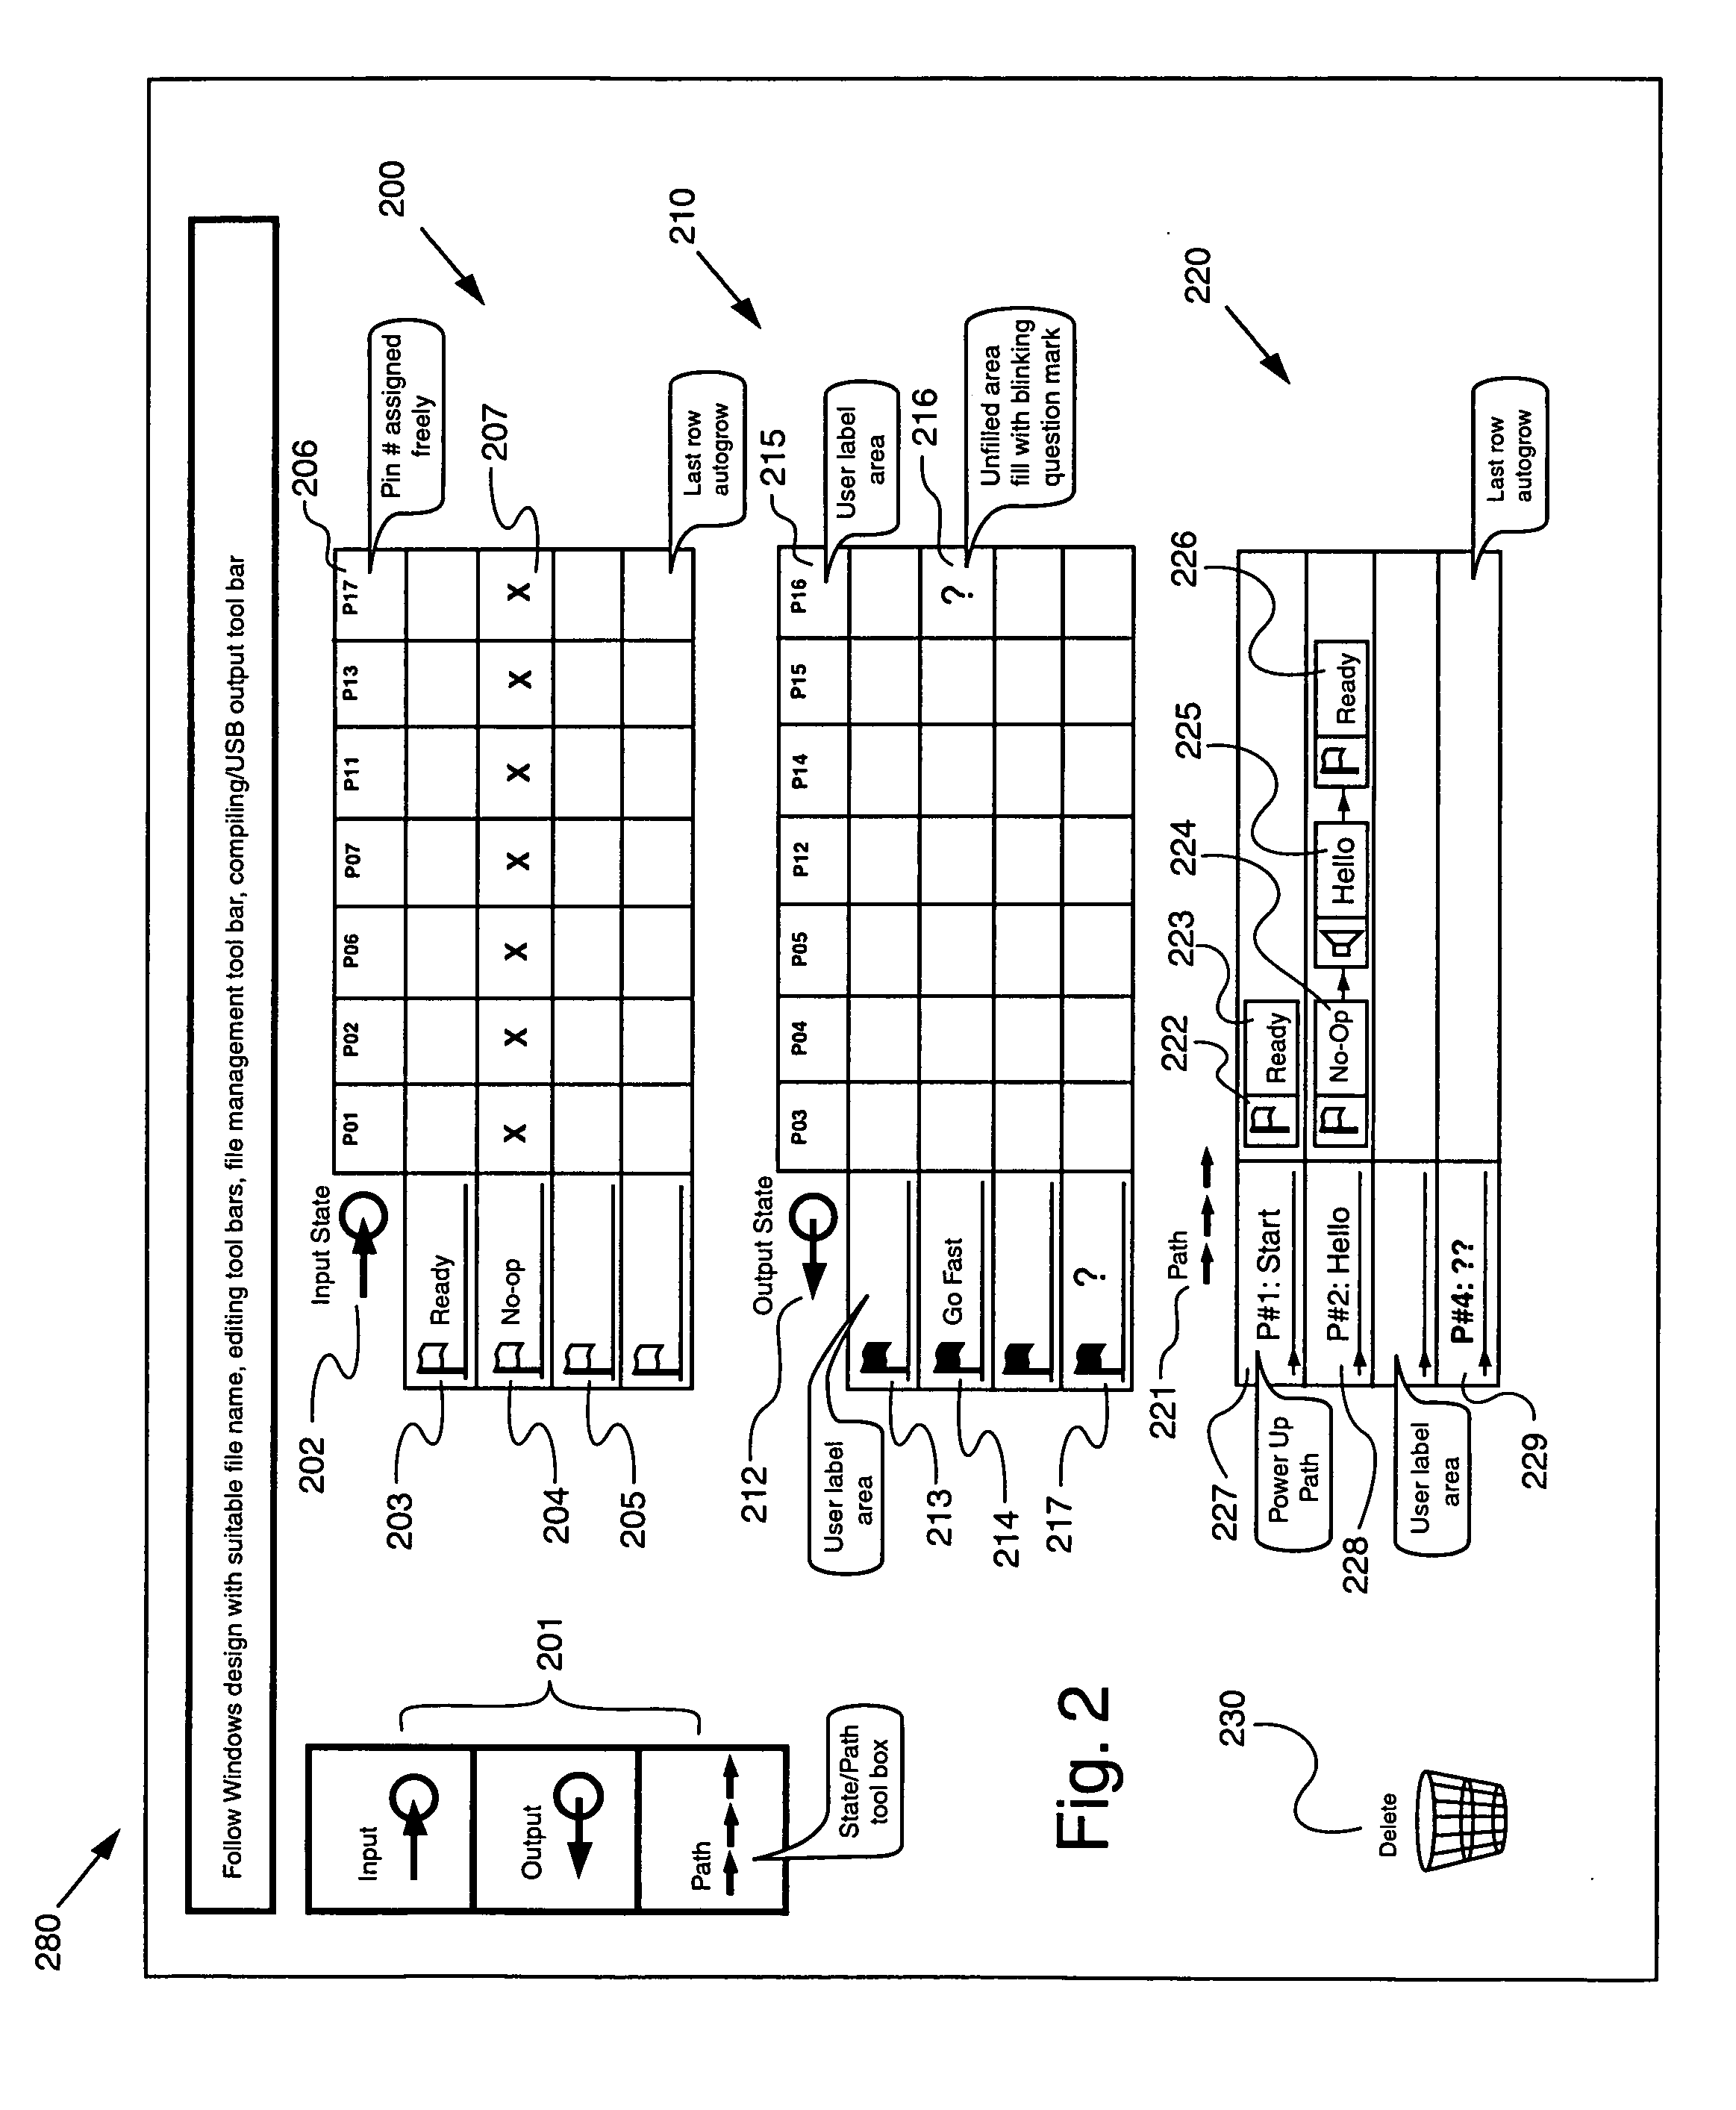 Cloud servicing system configured for servicing smart phone or touch pad circuit applications and consumer programmable articles